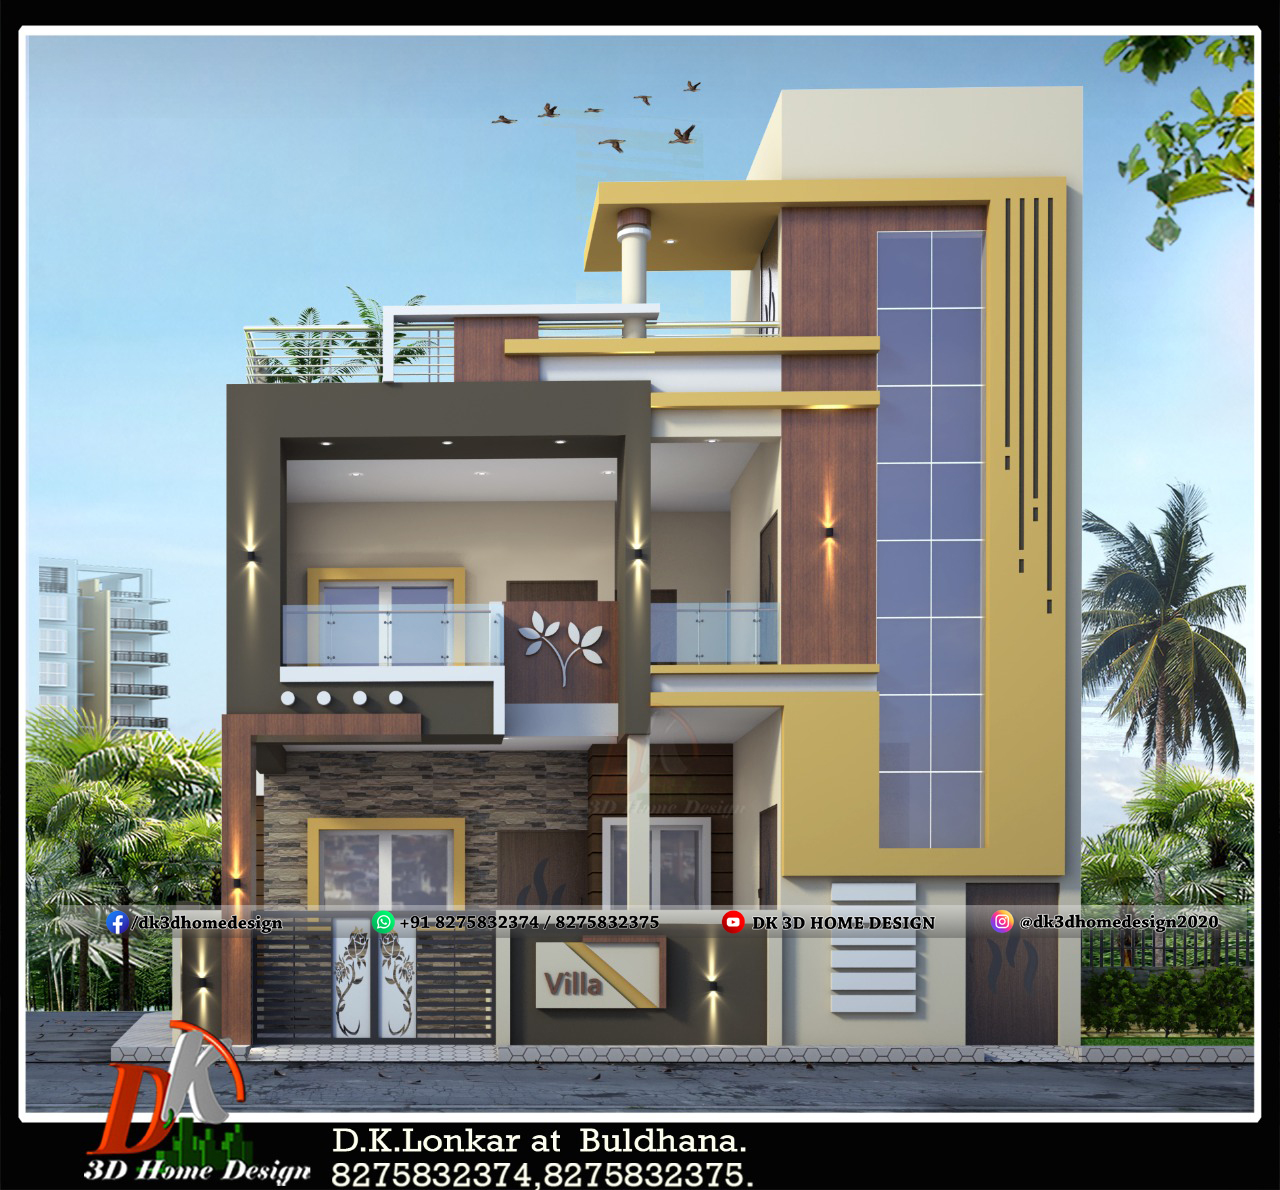 Low budget simple modern two storey house design